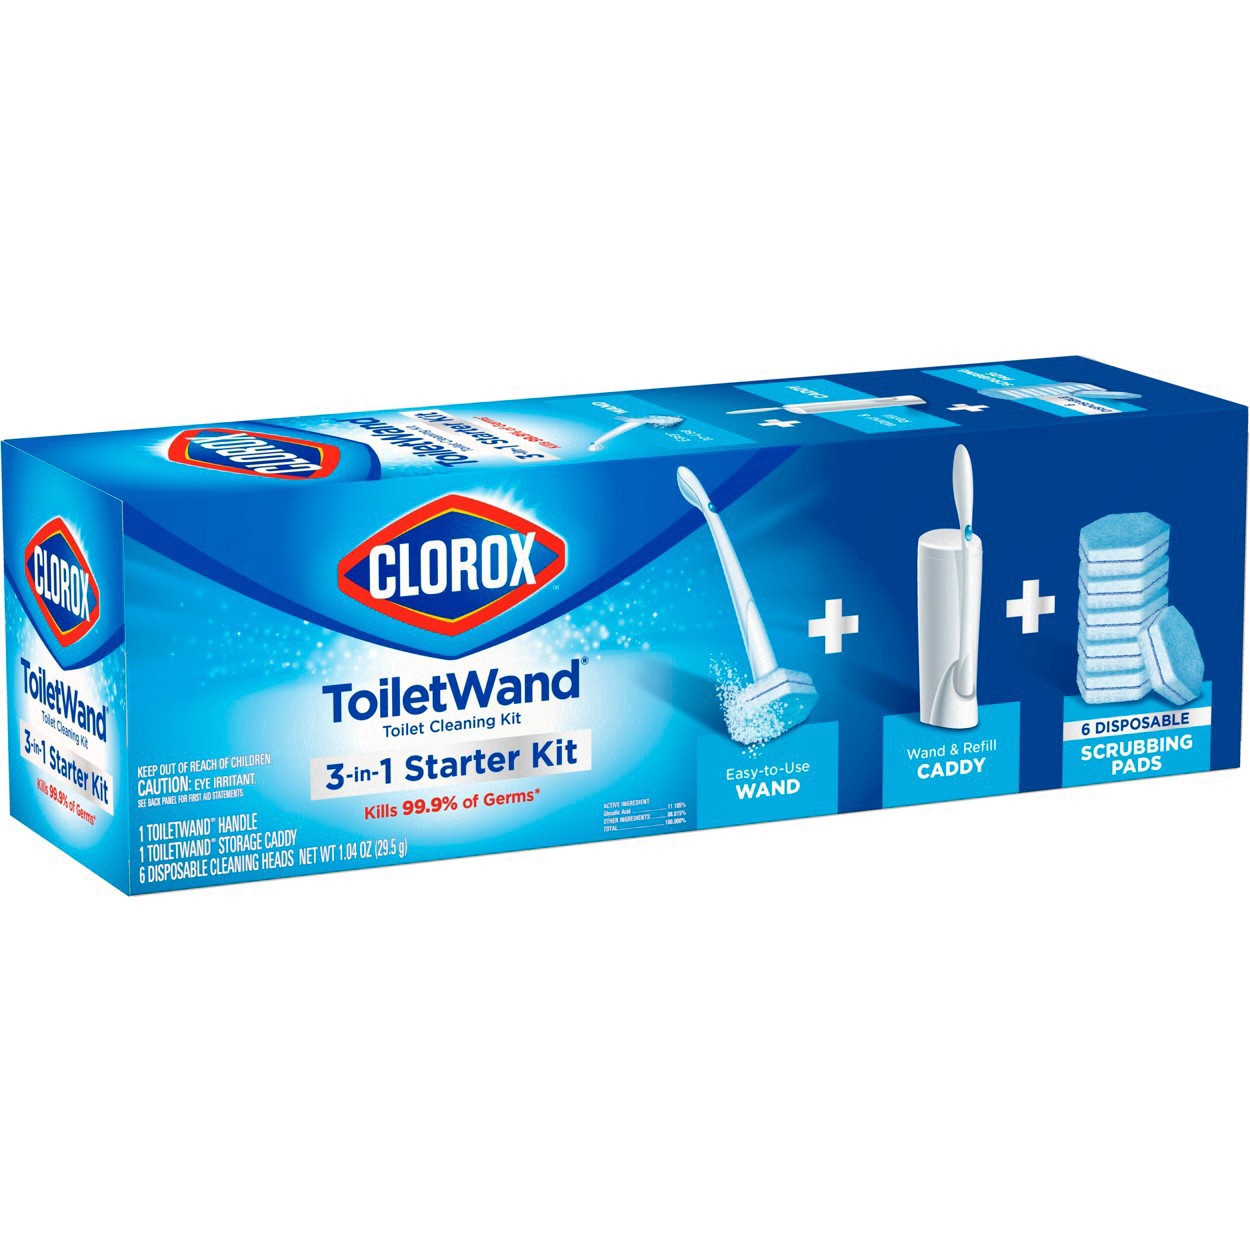 slide 12 of 176, Clorox Toilet Wand 3-in-1 Starter Toliet Cleaning Kit, 1 ct